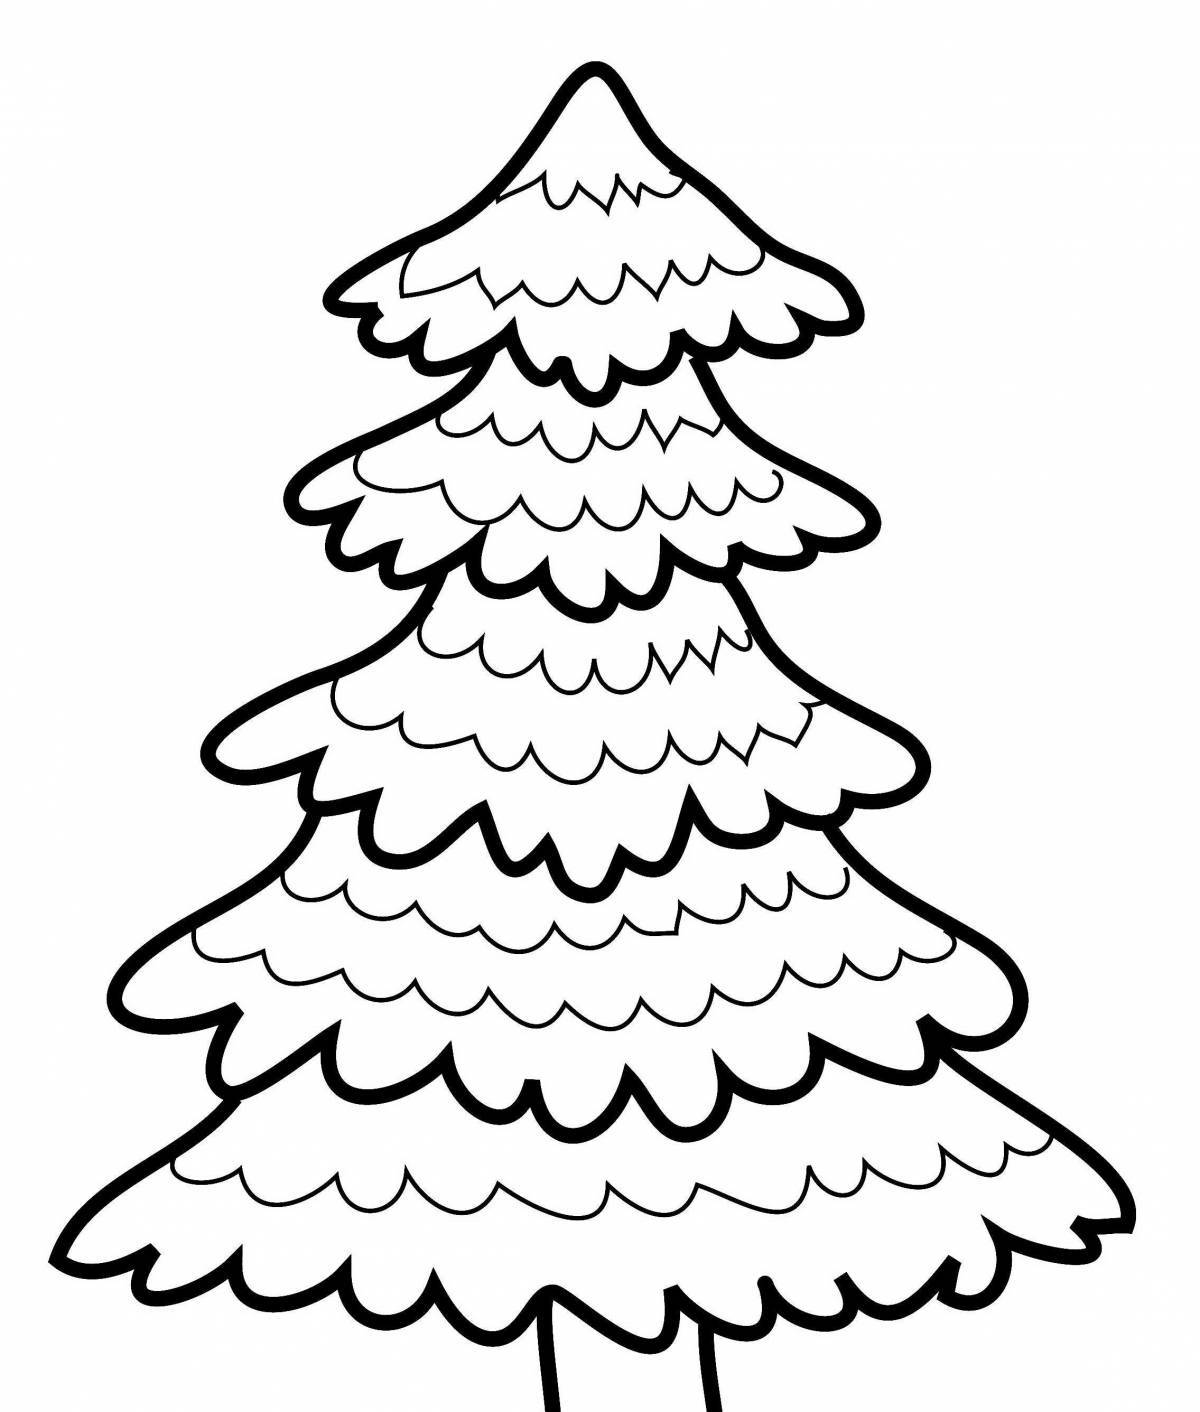 Cute christmas tree coloring page